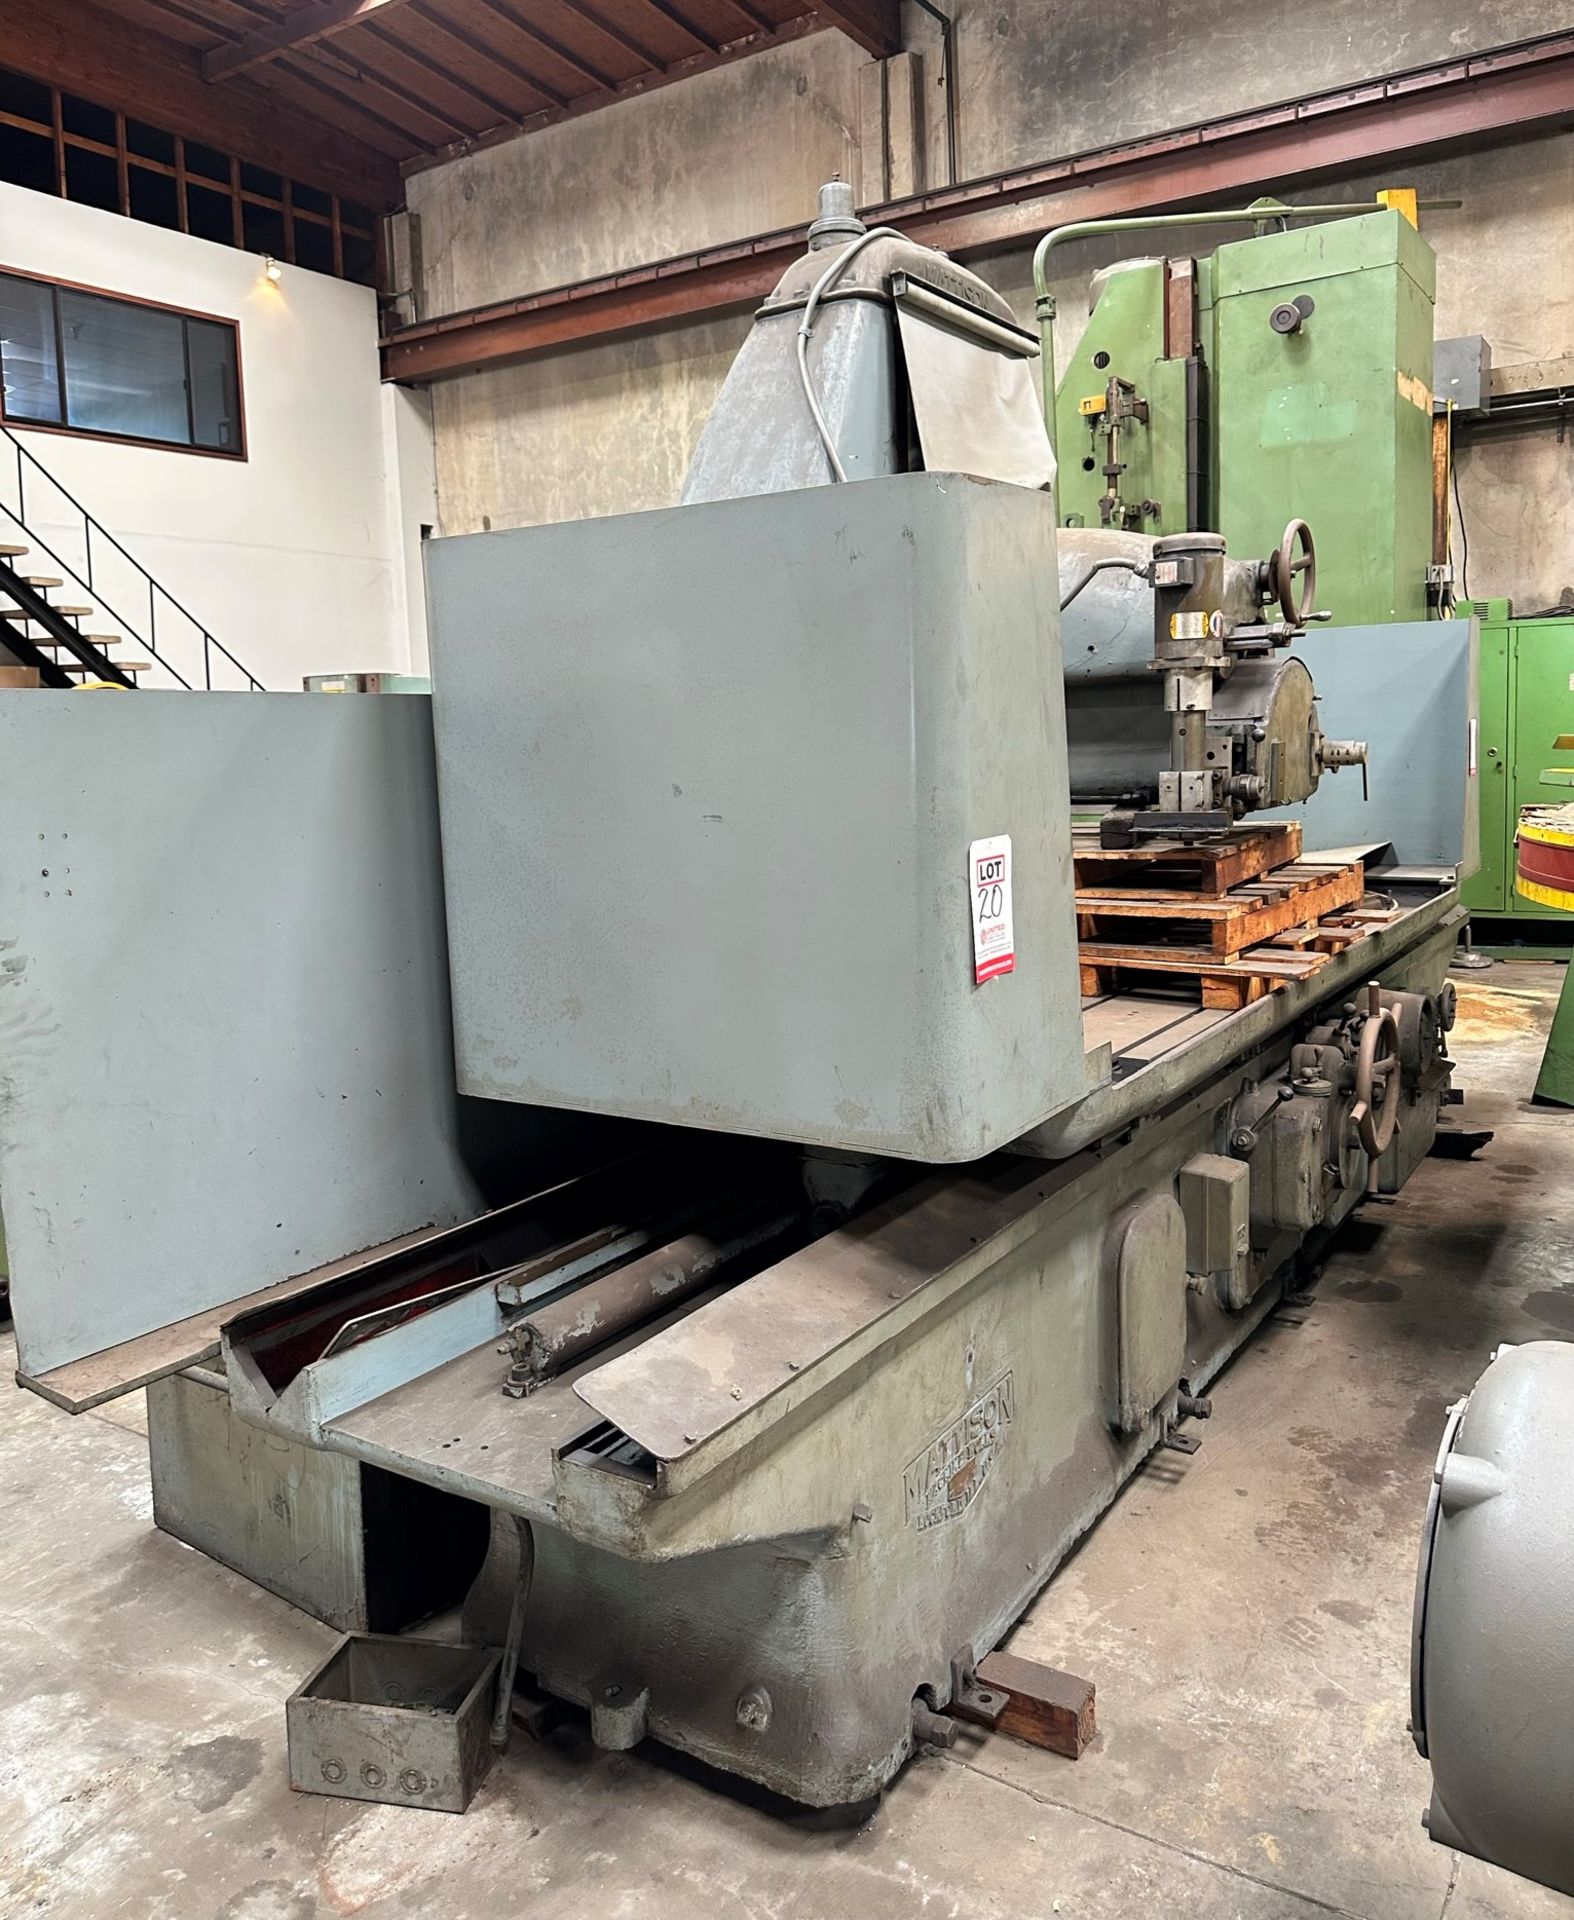 MATTISON SURFACE GRINDER, 104" X 36" WORKING SURFACE, USED, (LOCATION: SANTA FE SPRINGS, CA)